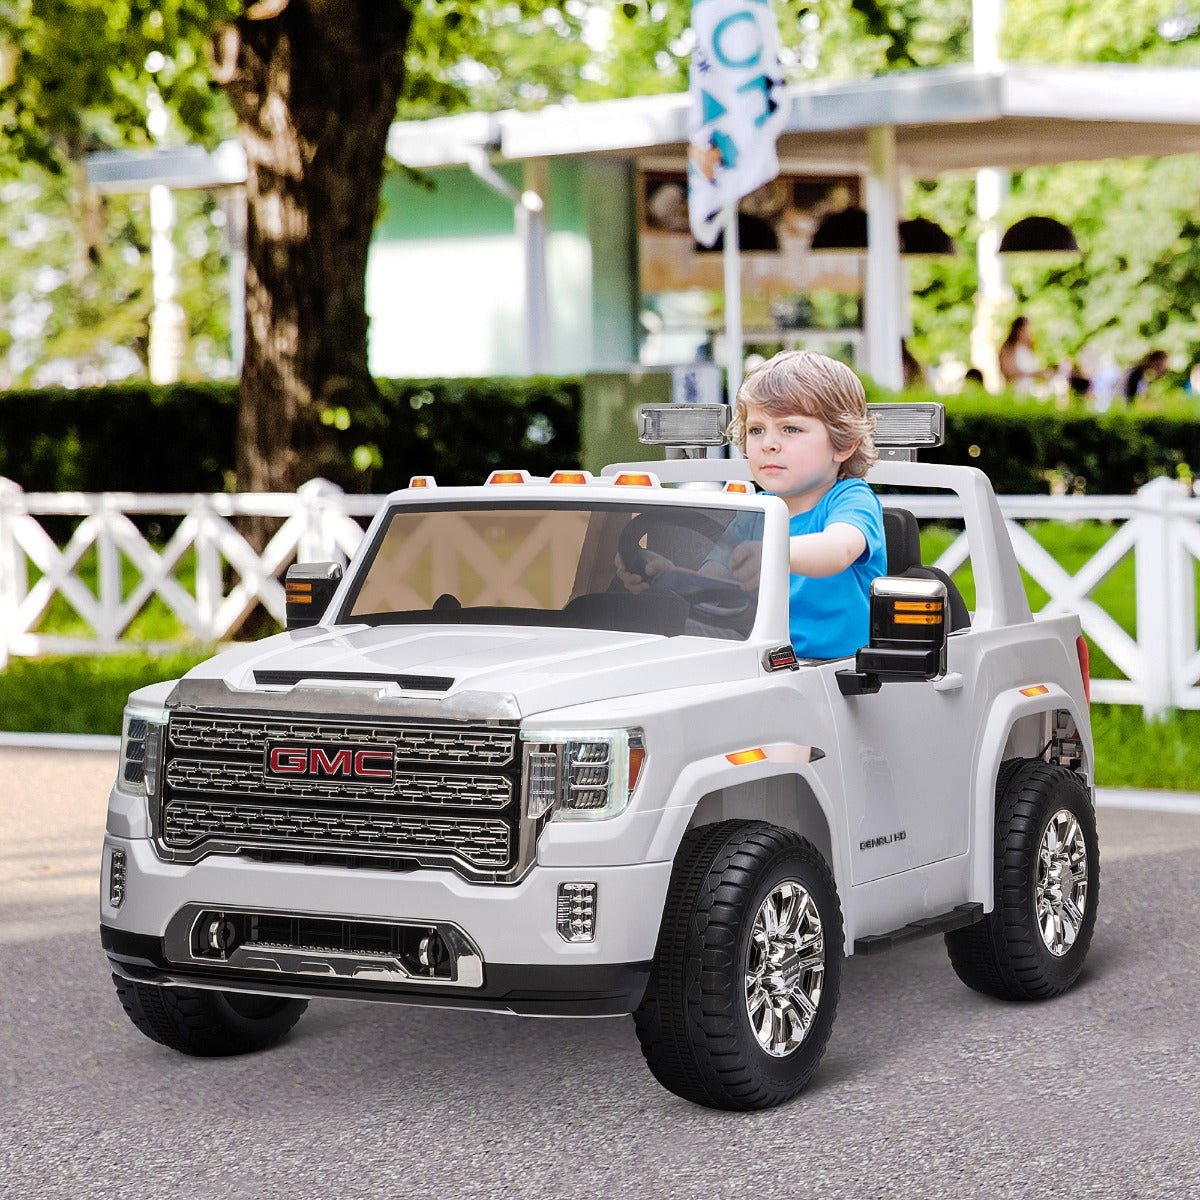 Toys and Games-Compatible 12V Battery-powered Kids Electric Ride On Car GMC Sierra HD Pickup Truck Toy with Parental Remote Control for 3-8 White - Outdoor Style Company